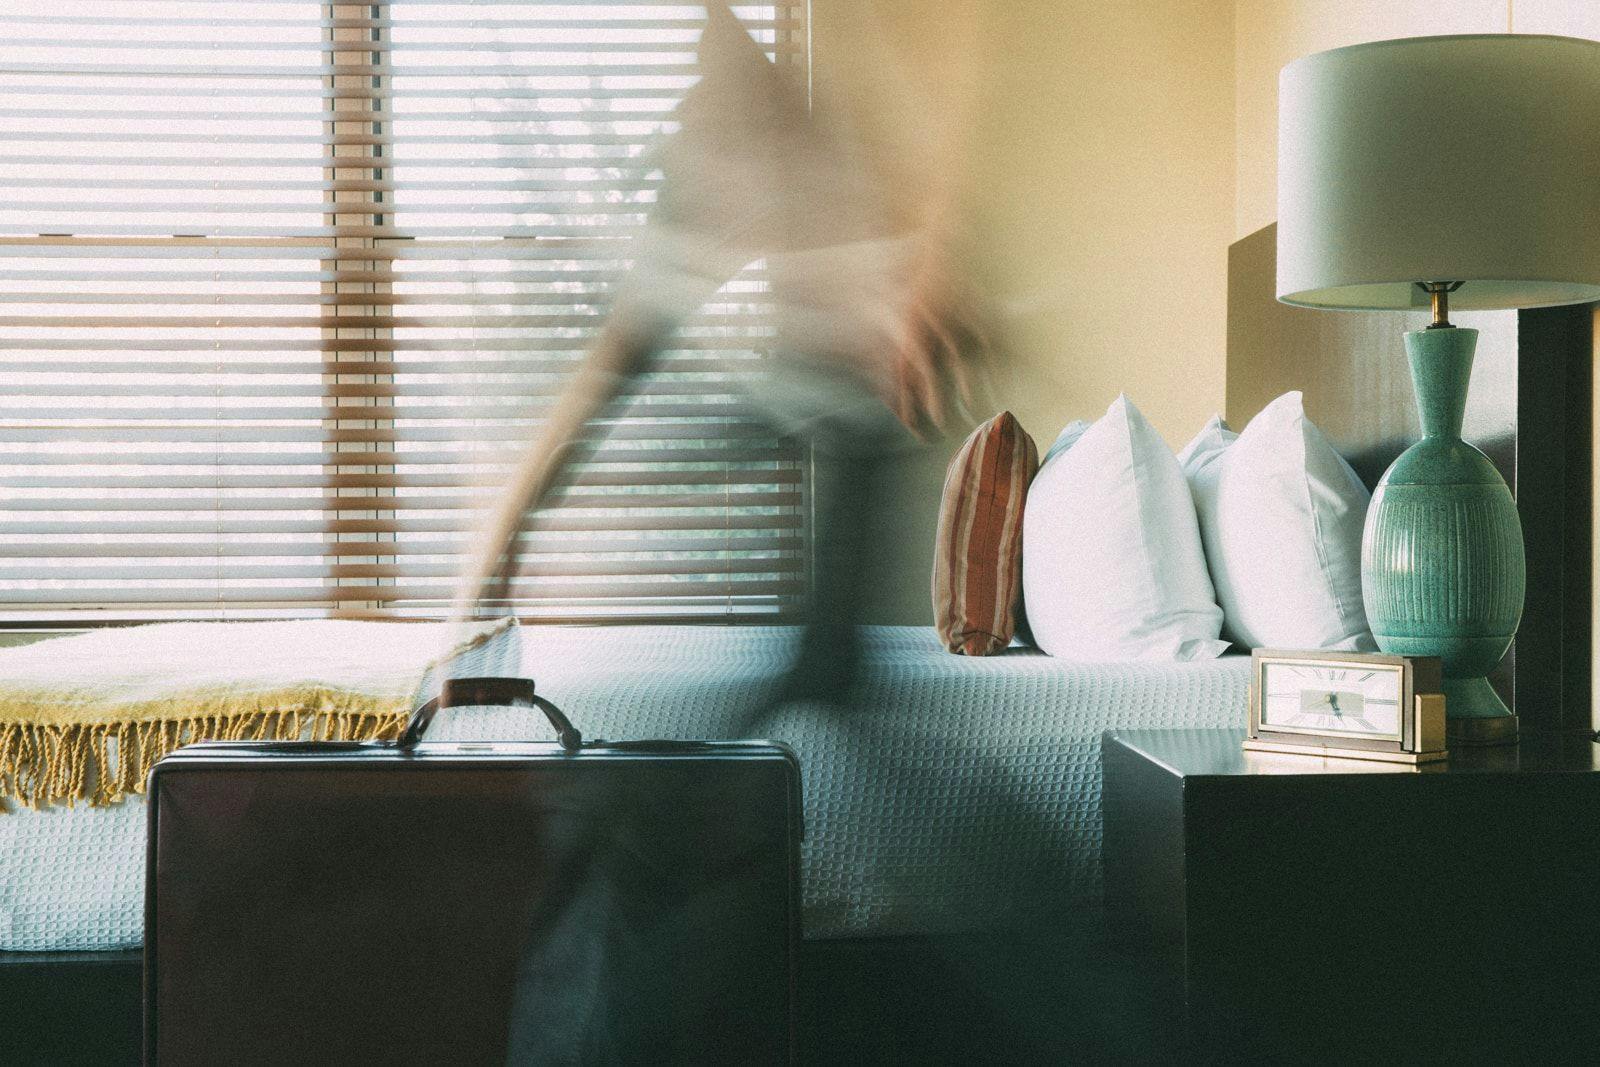 Blurred movements of a guest in their hotel room